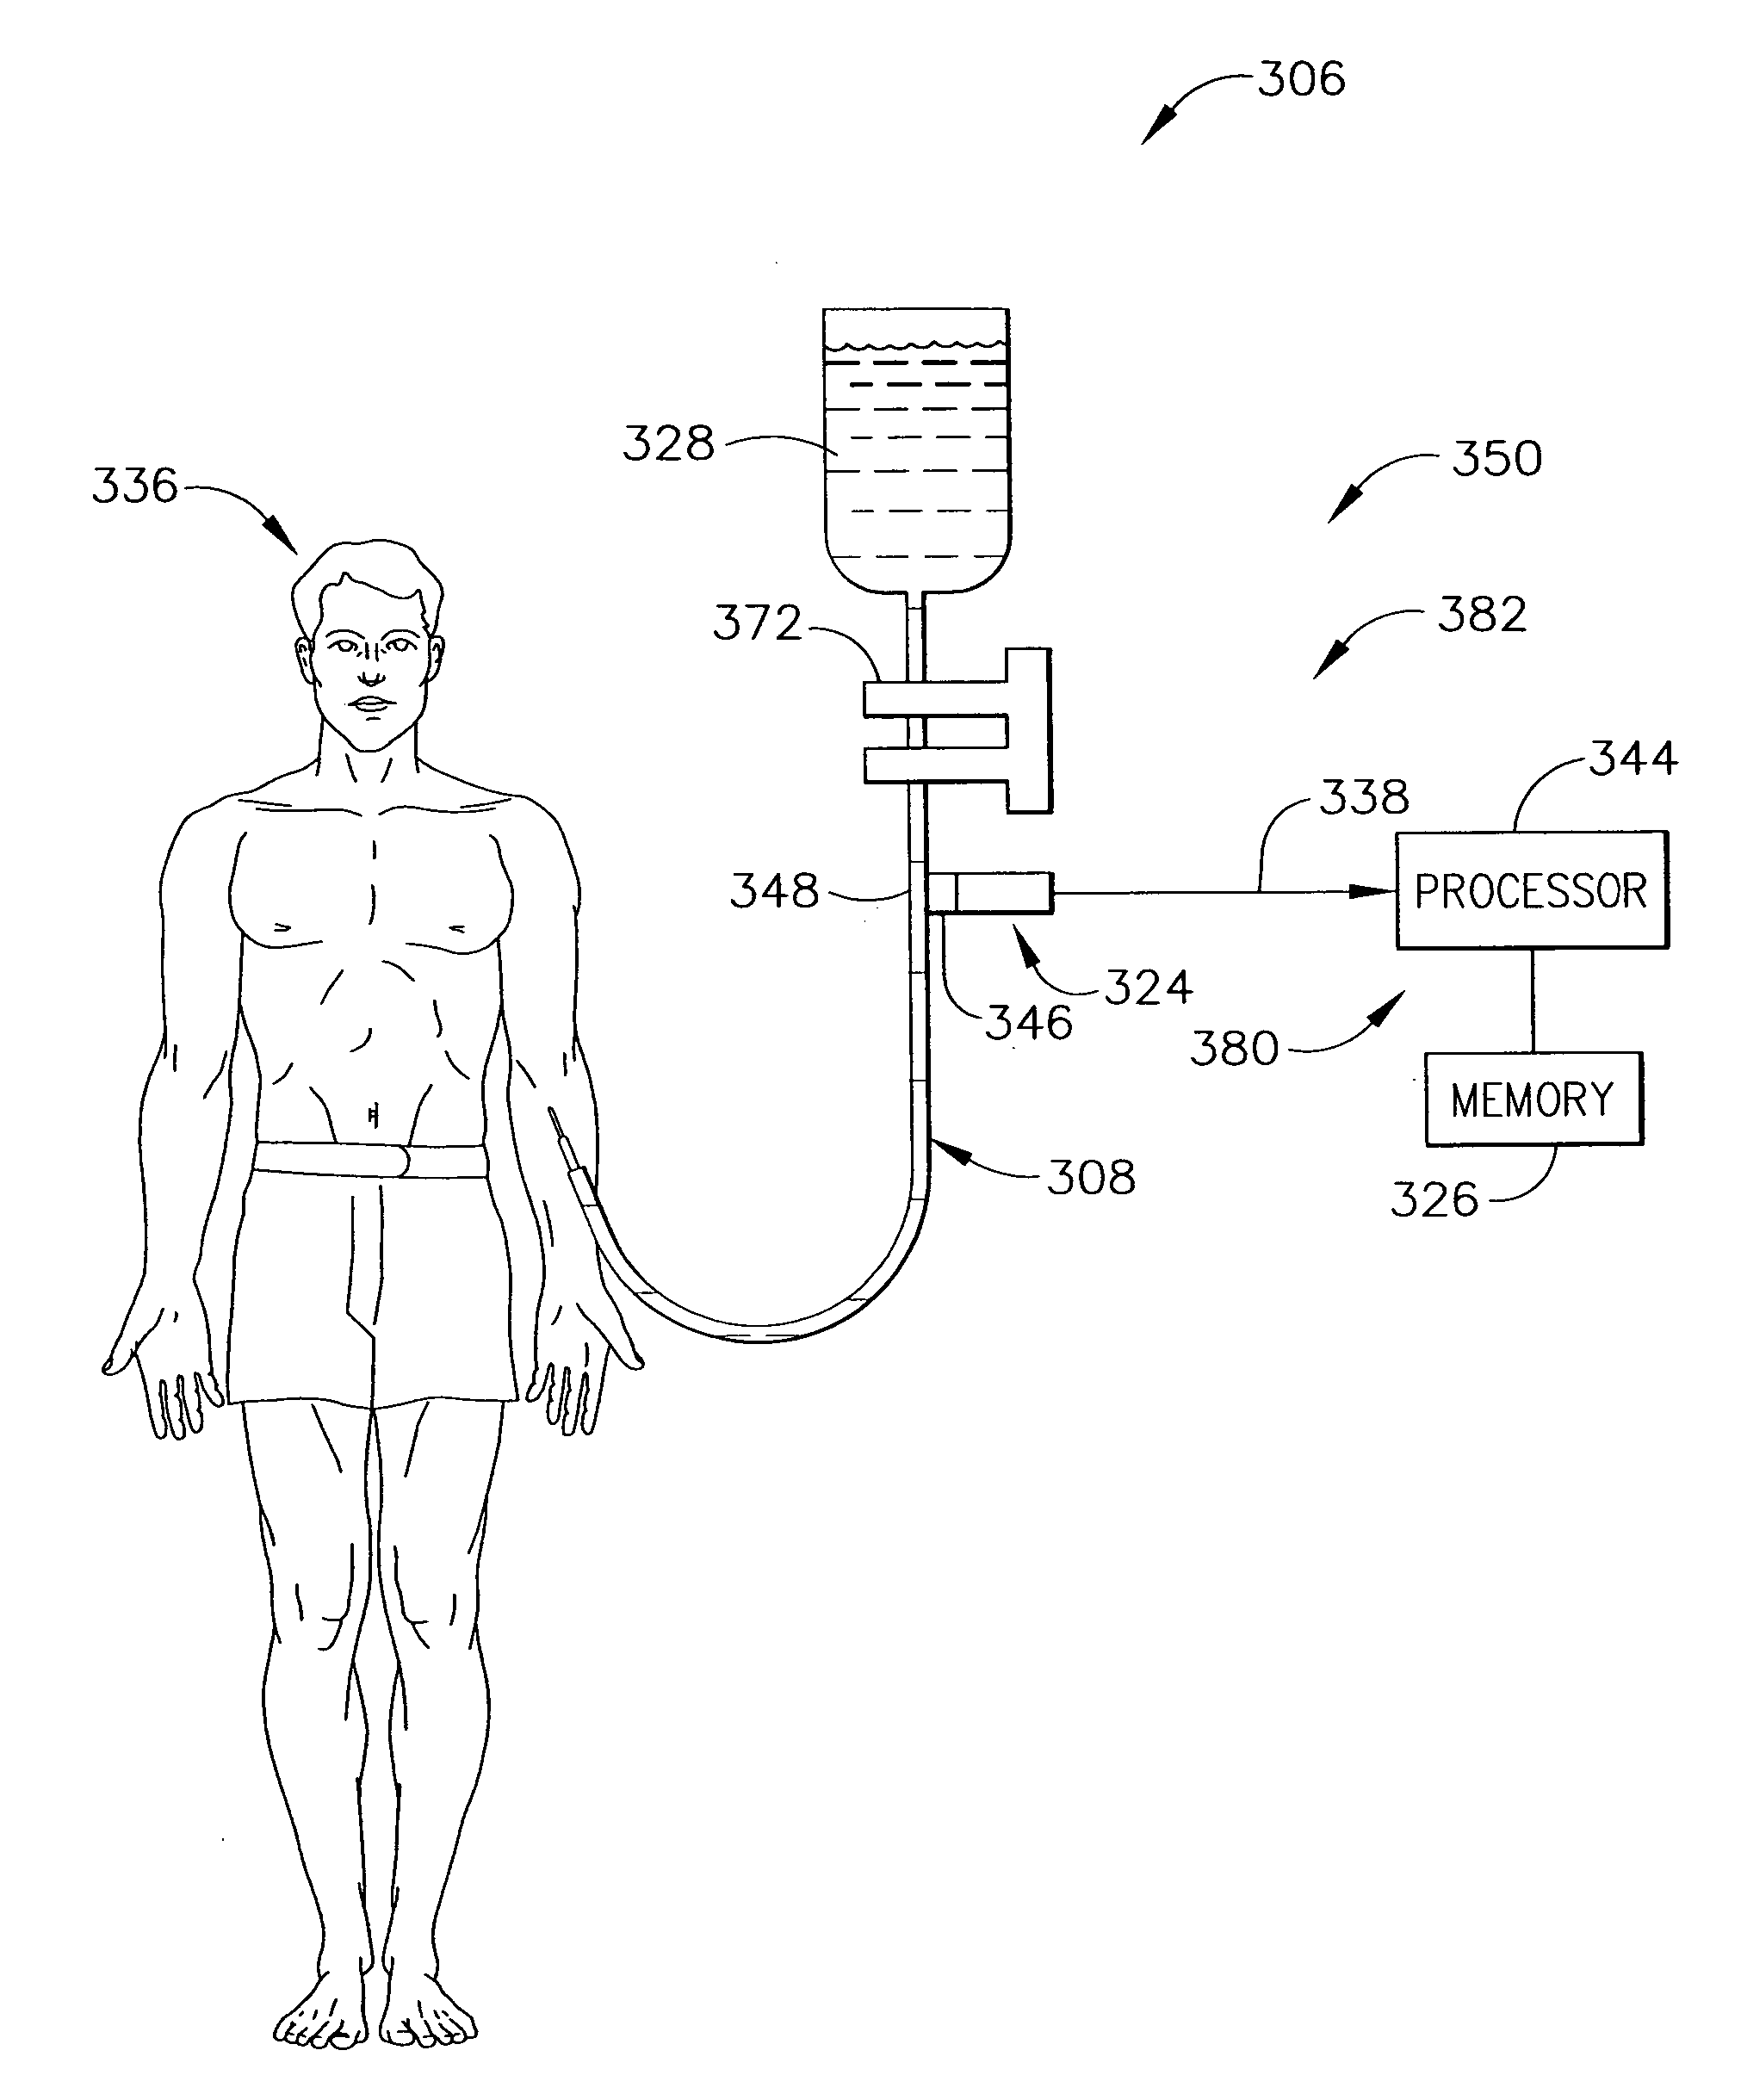 Apparatus for monitoring a patient during drug delivery